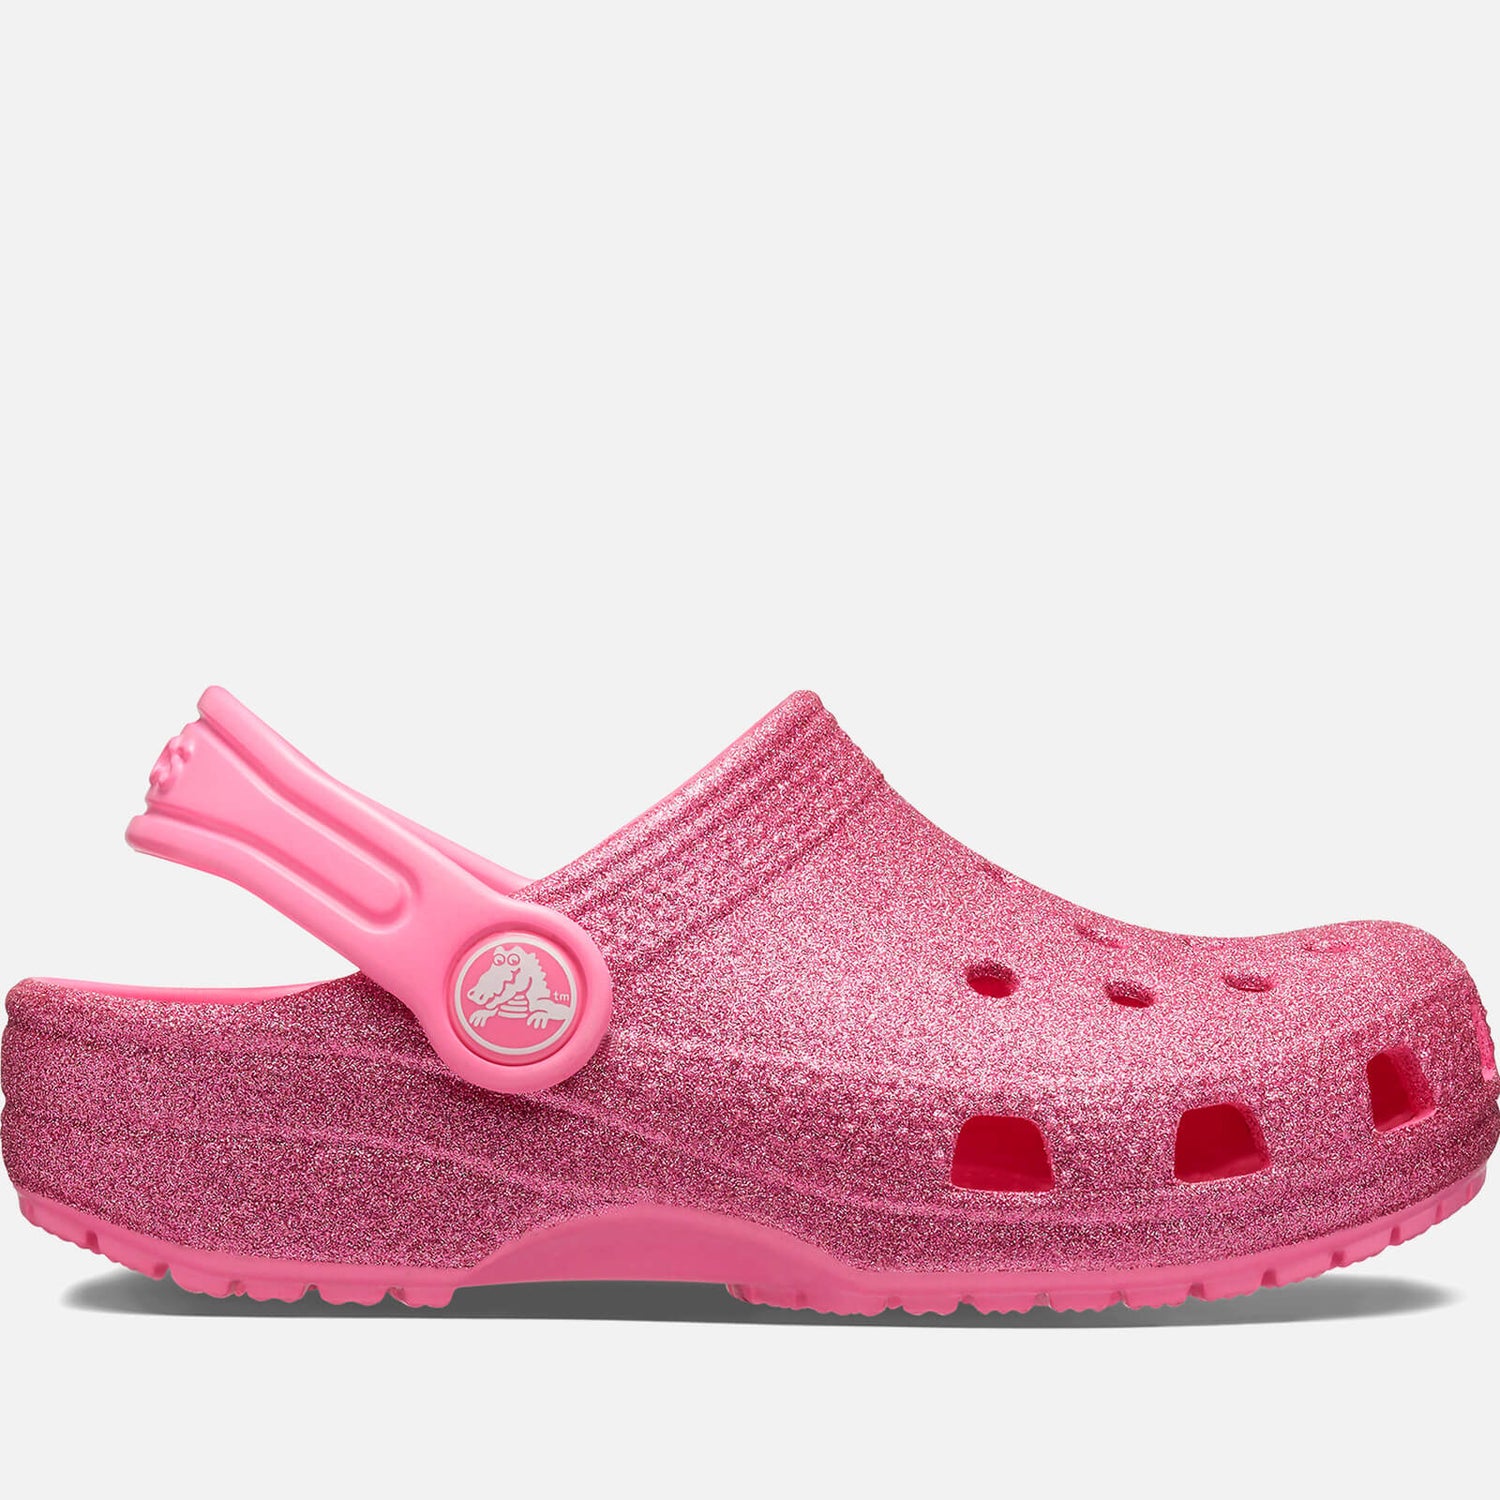 Crocs Toddlers' Classic Glittered Rubber Clogs